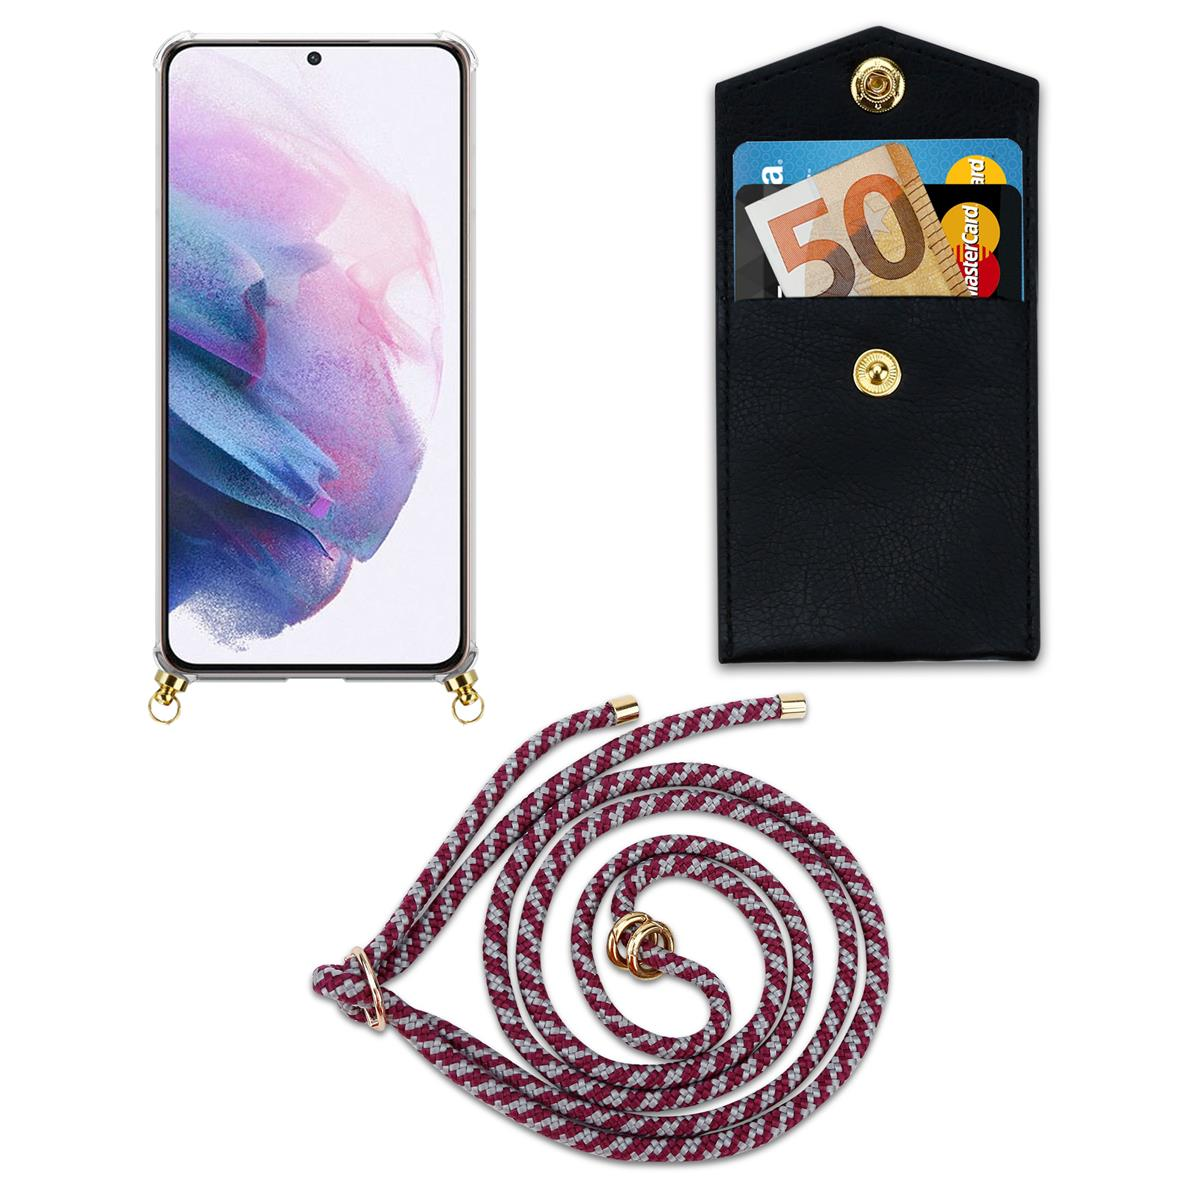 Kordel Hülle, und Samsung, Gold ROT Handy Band Backcover, Ringen, Kette abnehmbarer CADORABO S21 WEIß mit PLUS, Galaxy